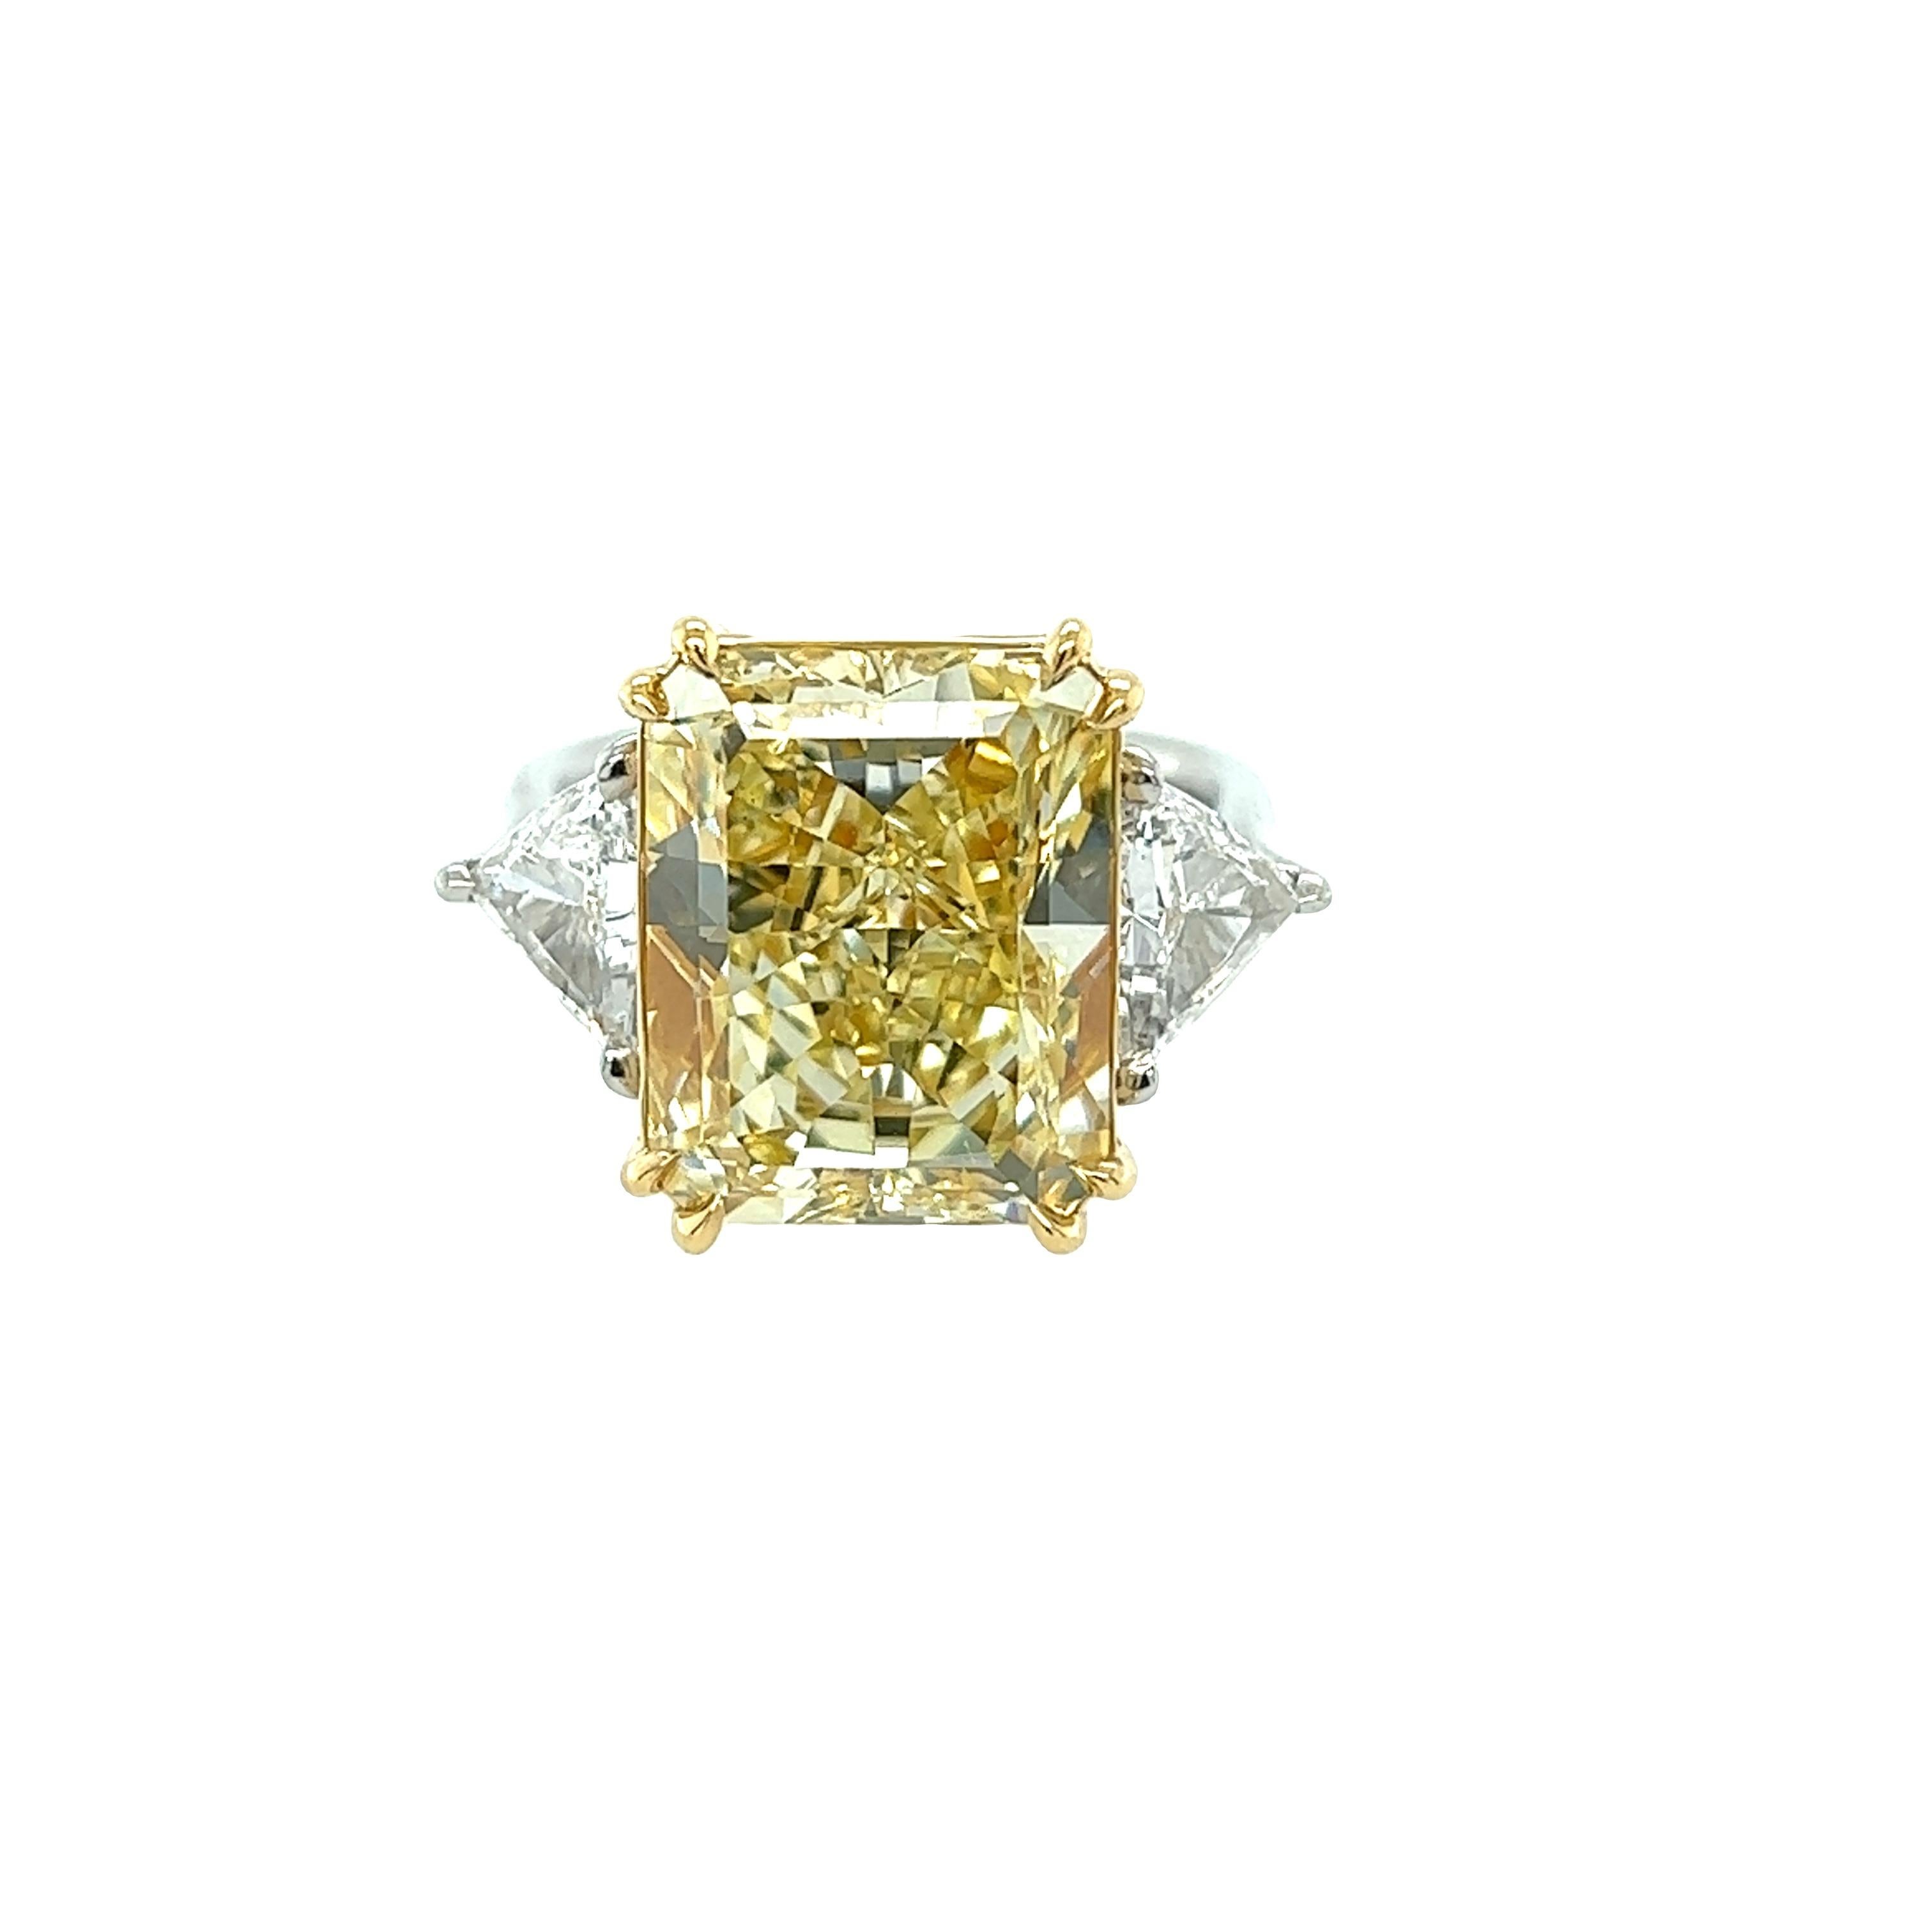 Rosenberg Diamonds & Co. 10.41 carat Radiant Cut Fancy Yellow VS1 clarity is accompanied by a GIA certificate. This extraordinary radiant cut is set in a handmade platinum & 18k yellow gold setting with perfectly matched pair of step cut trillion